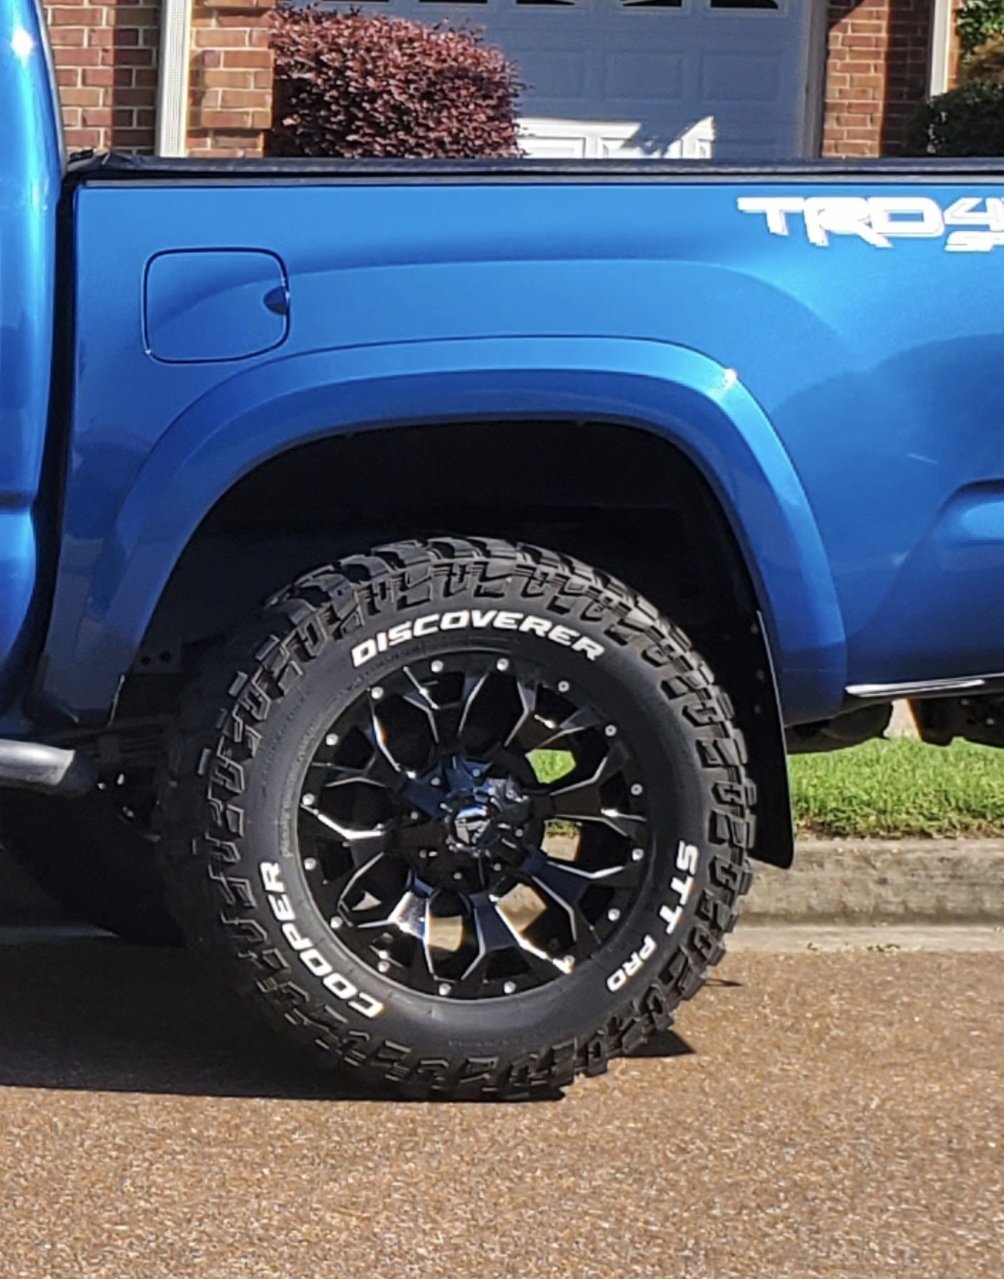 Tire shine for off road tires?